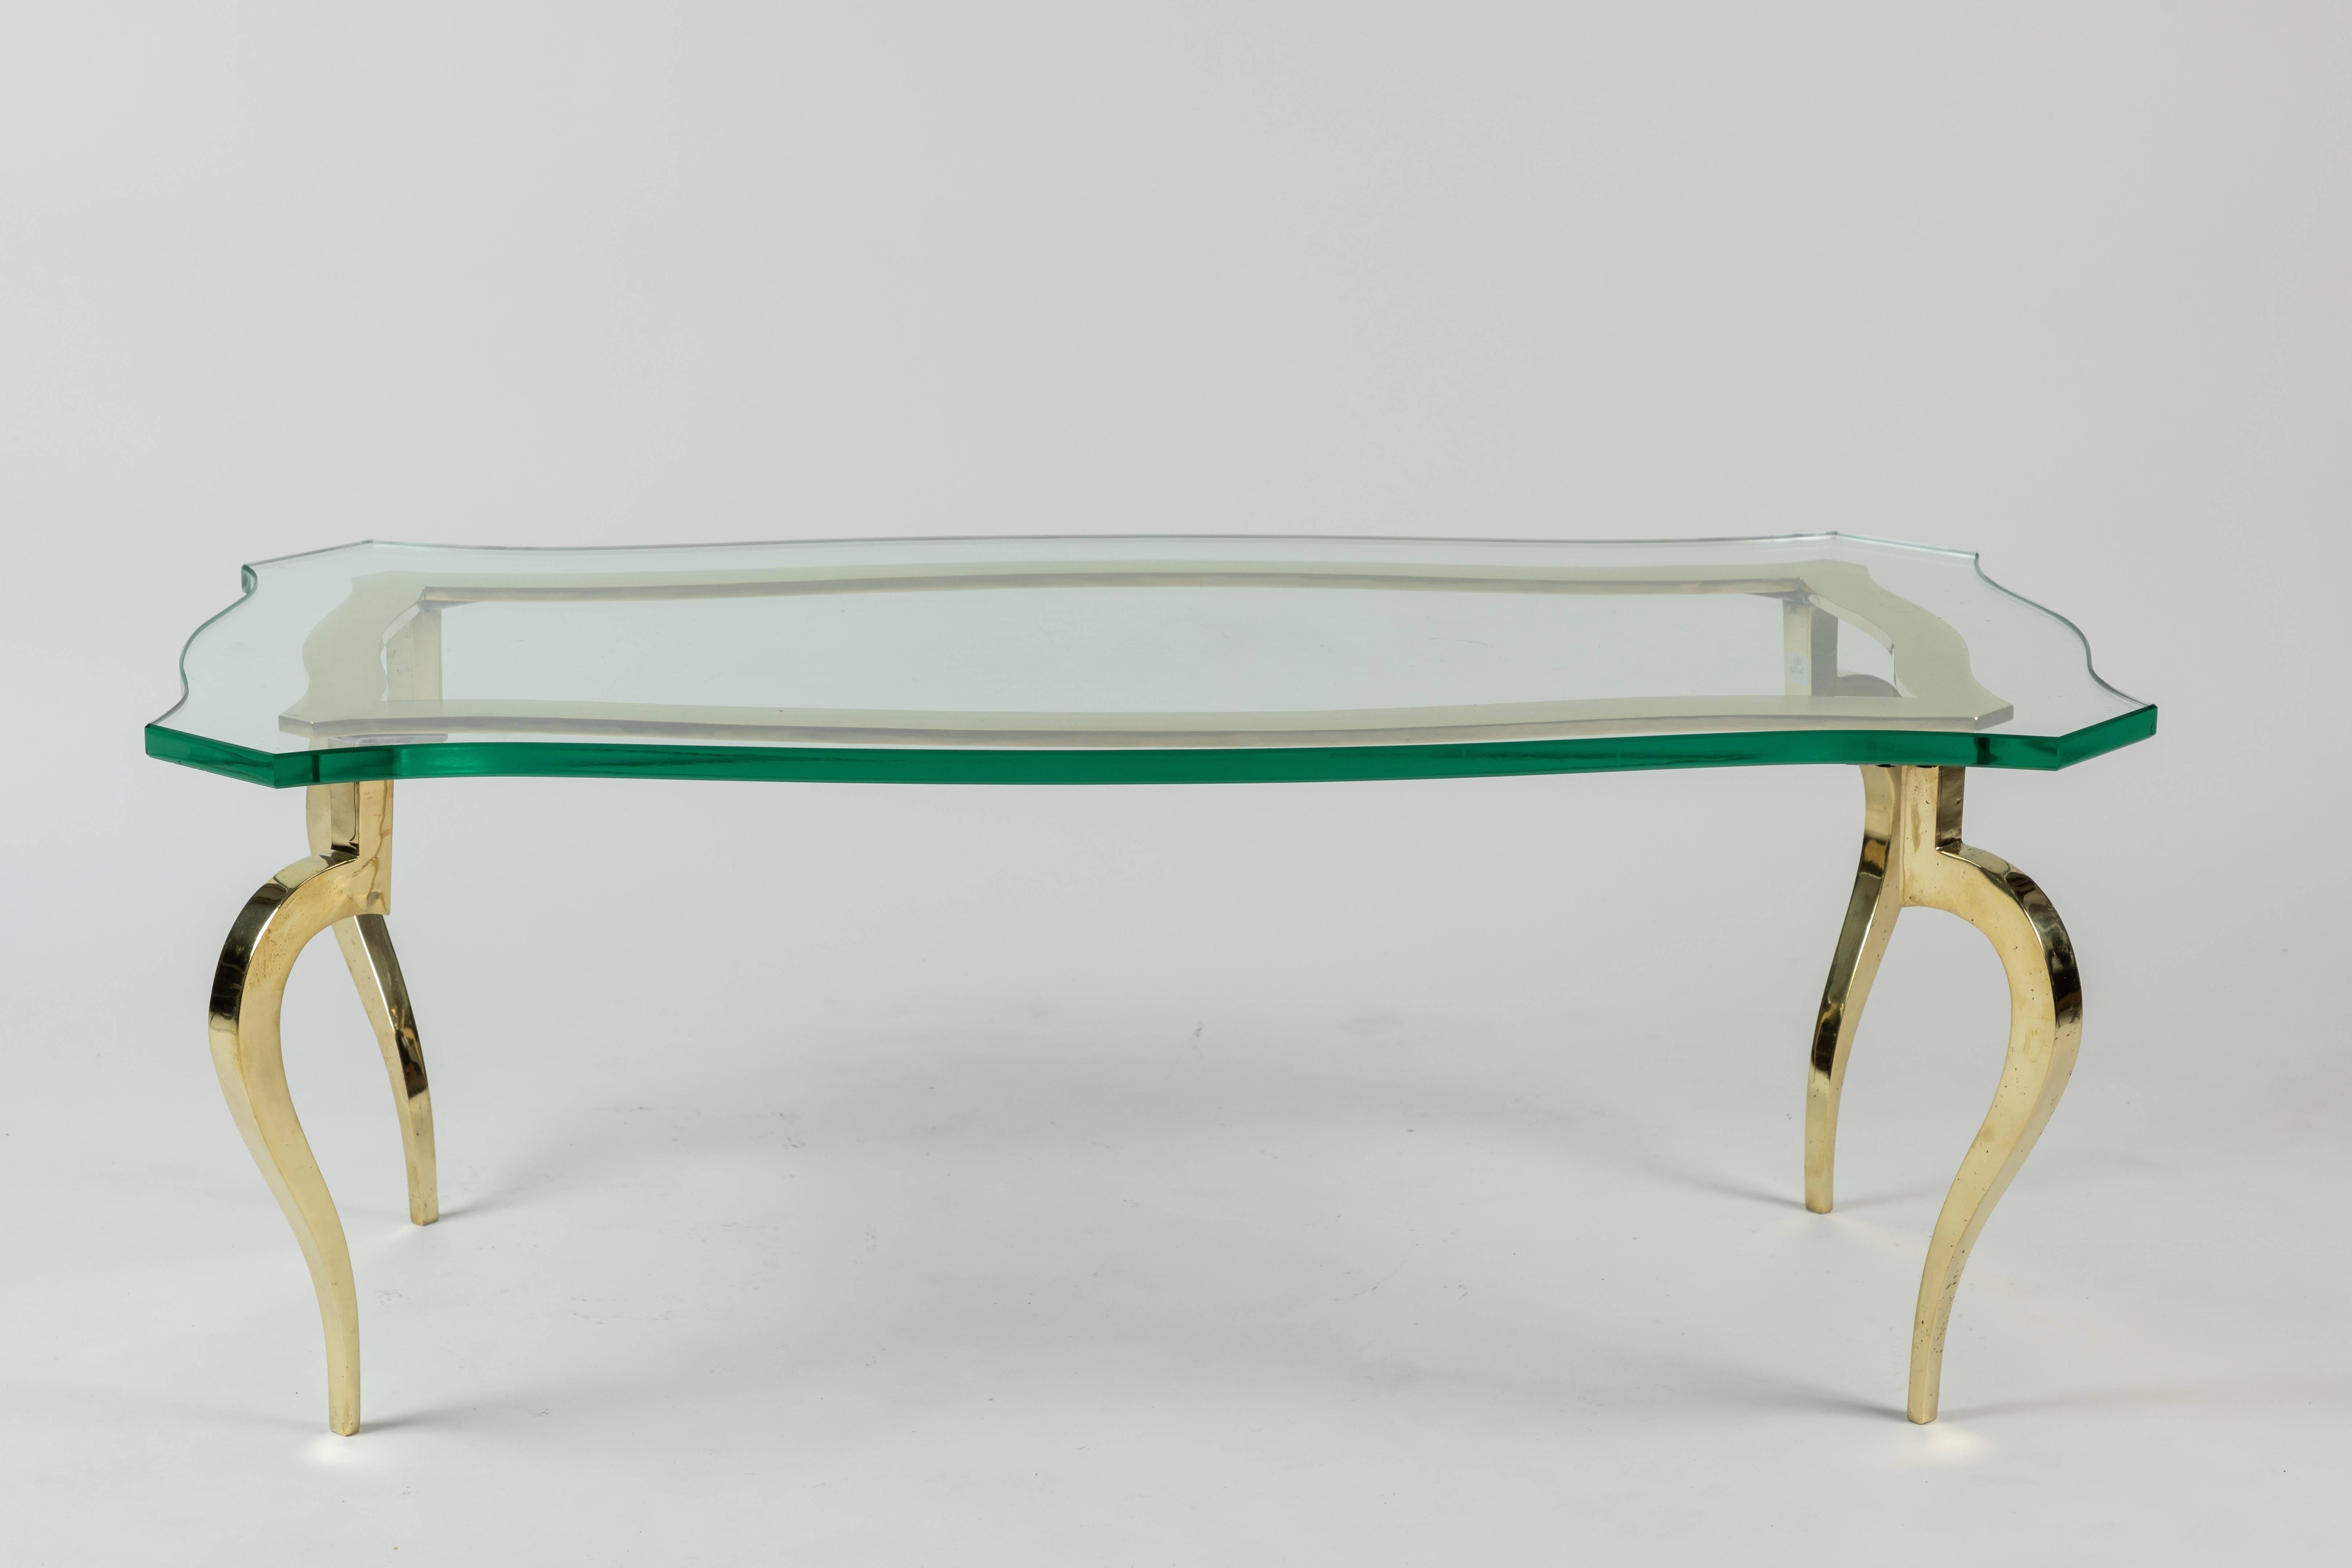 Slick glass-top cocktail table with brass French legs. The glass top mimics the shape and the curves of the brass skeleton base below.